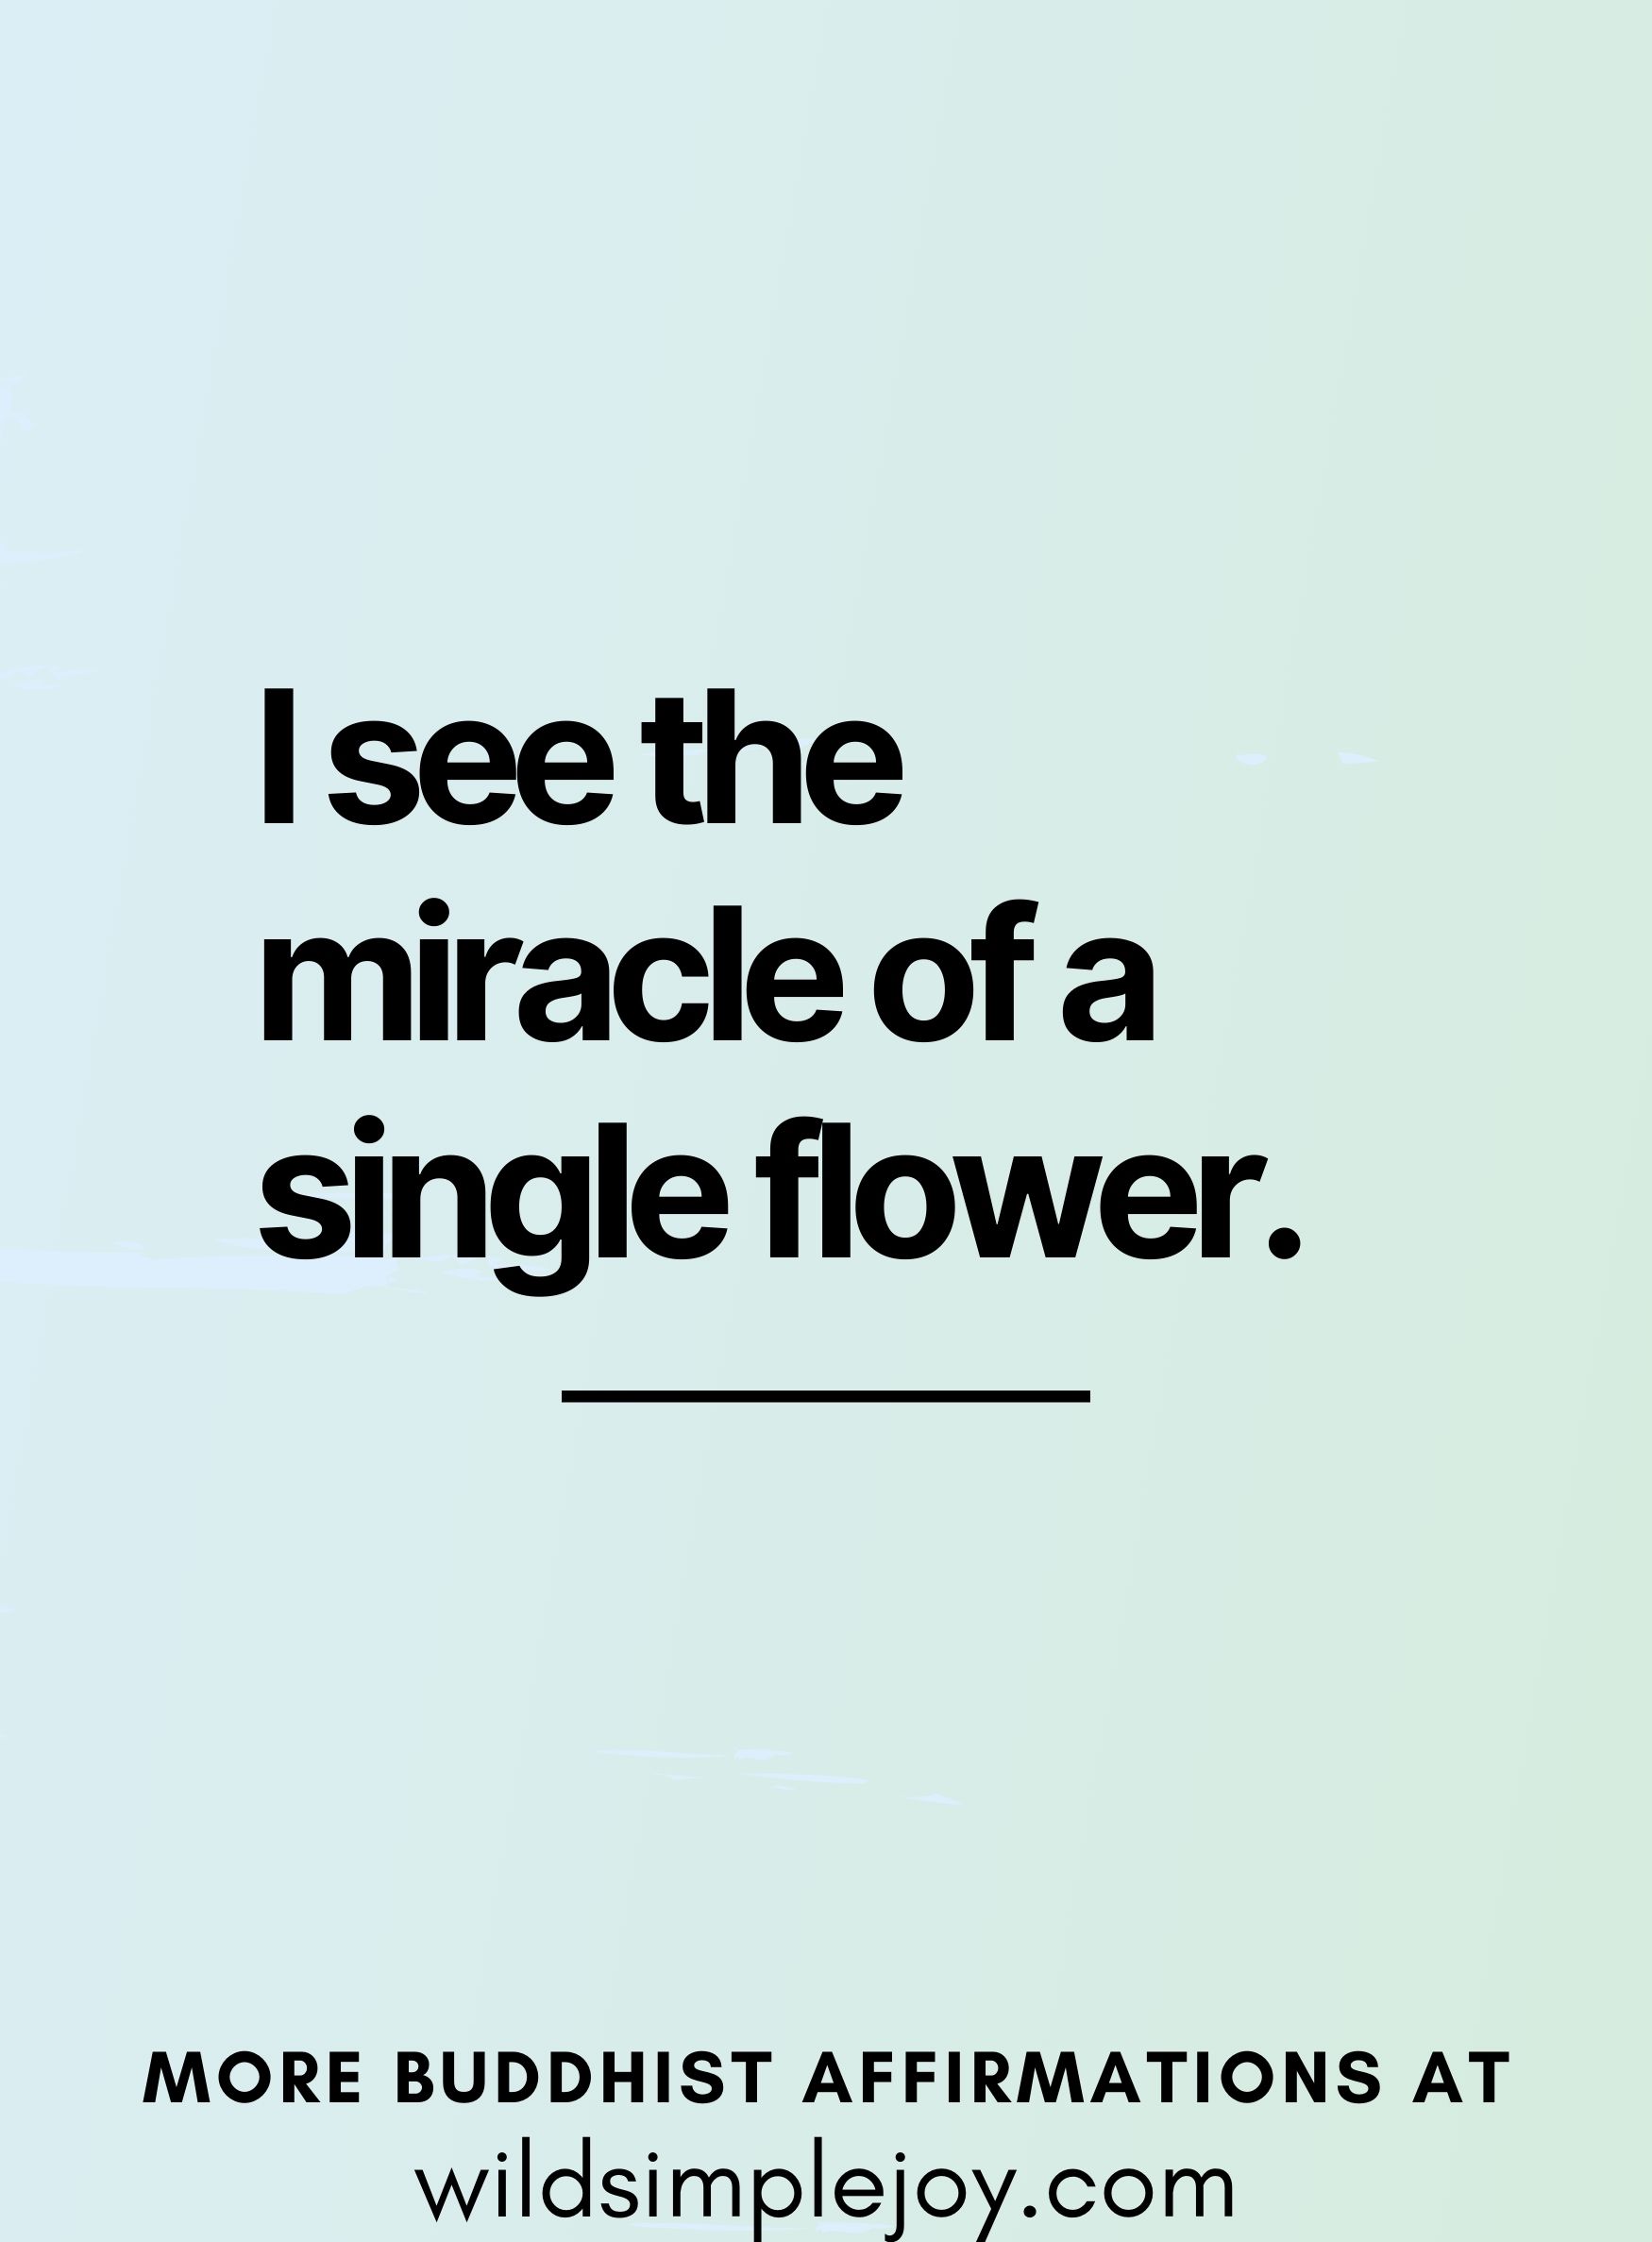 I see the miracle of a single flower. (affirmation based on a Buddha quote, on a green and blue background)